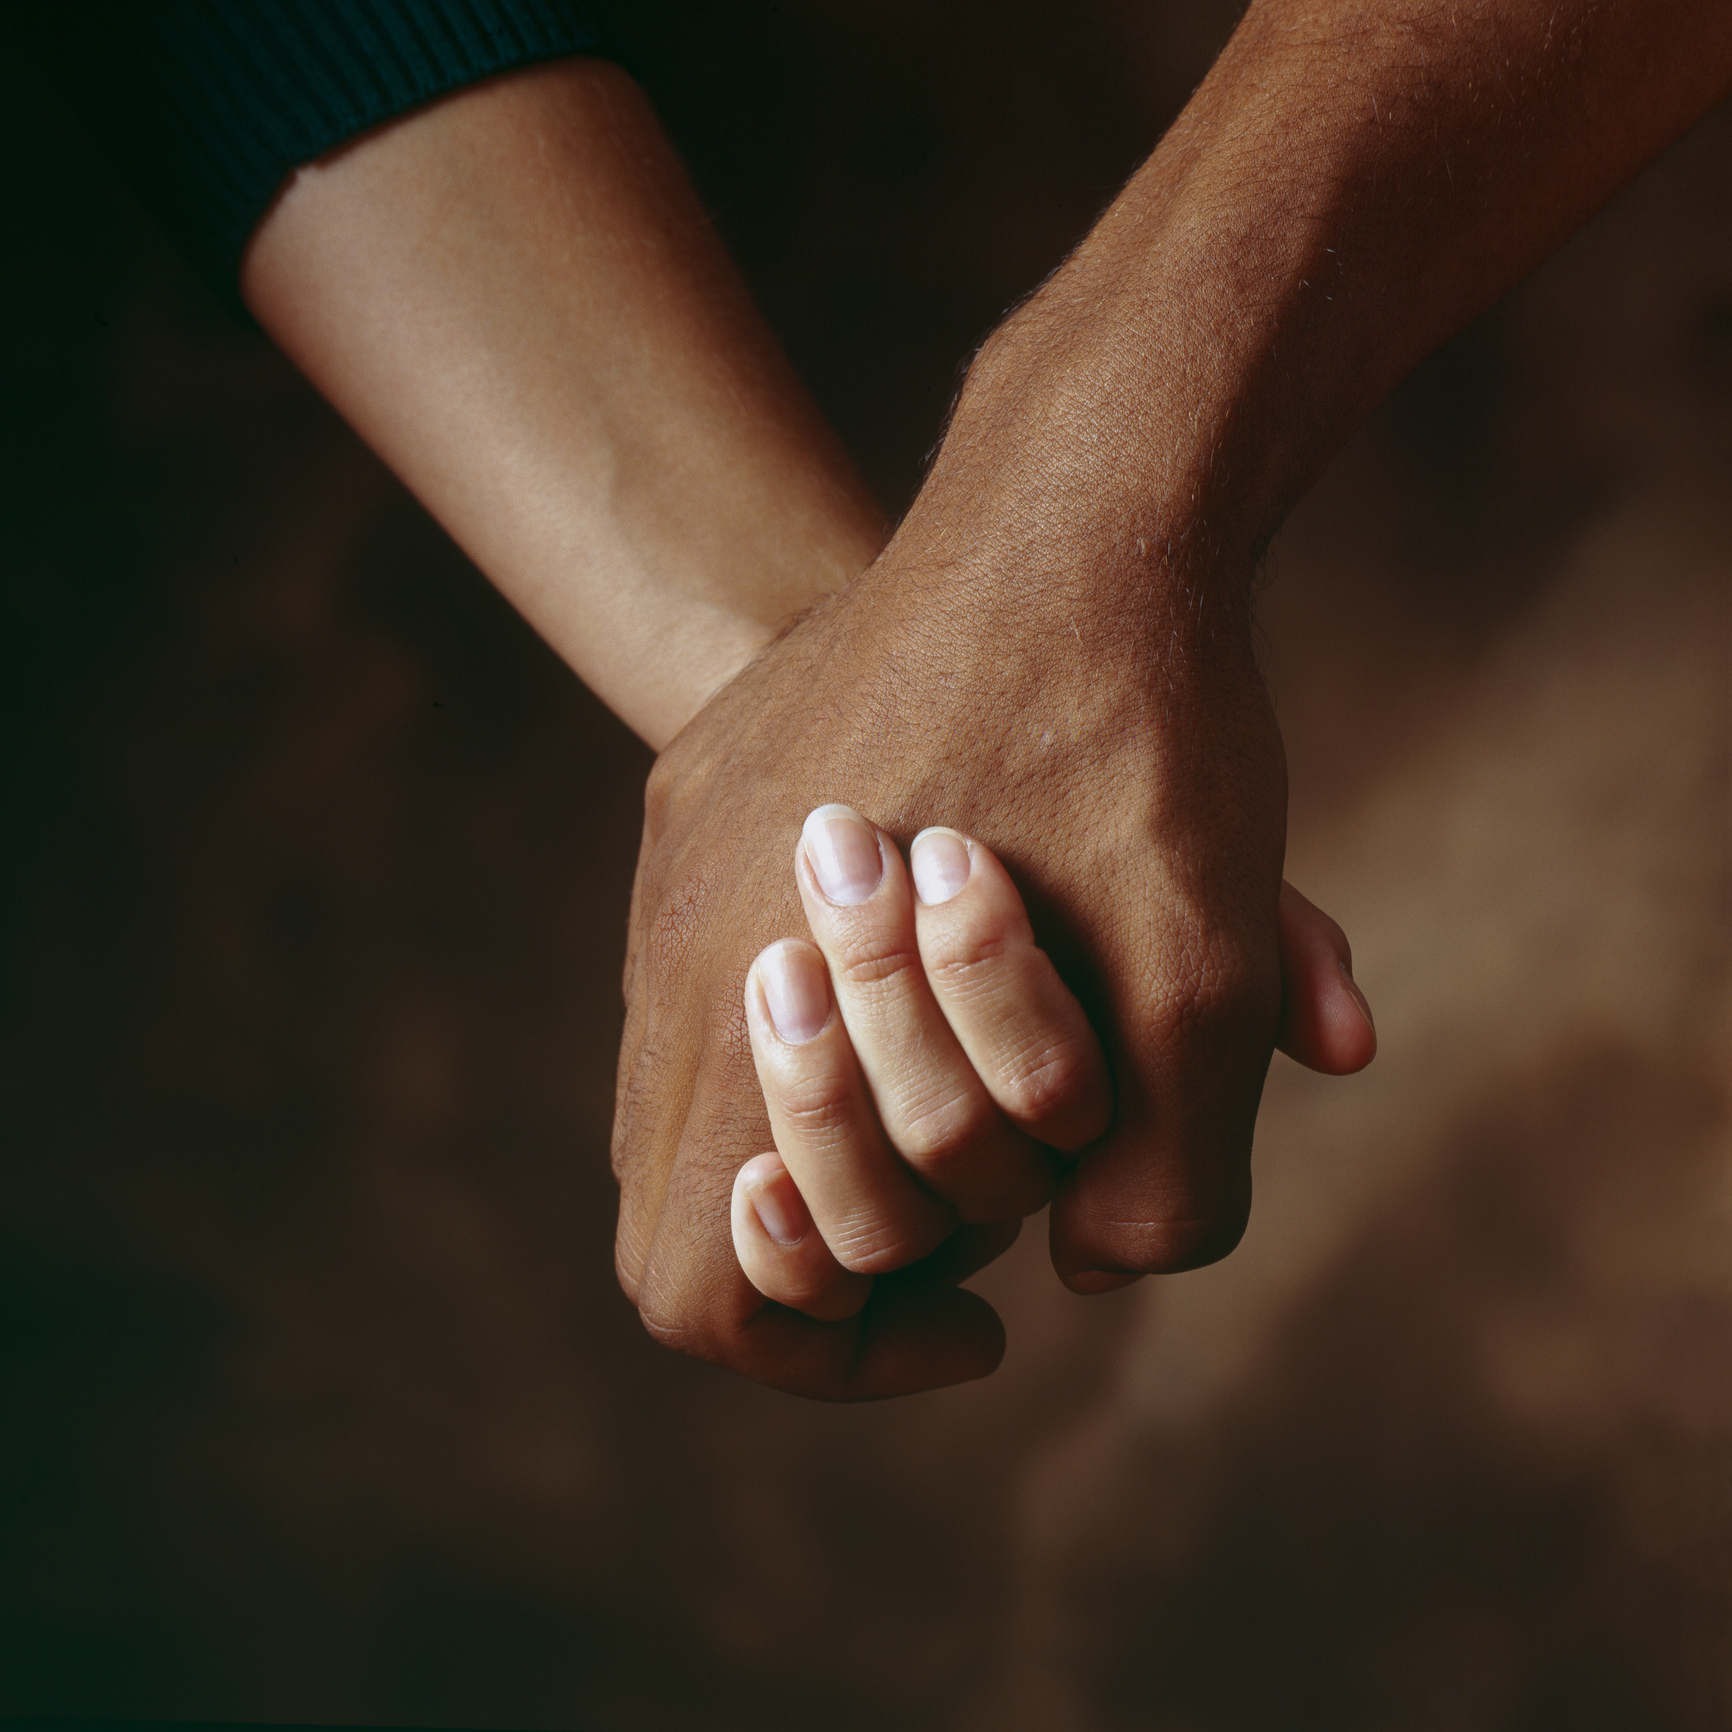 Two hands clasped, symbolizing connection and intimacy